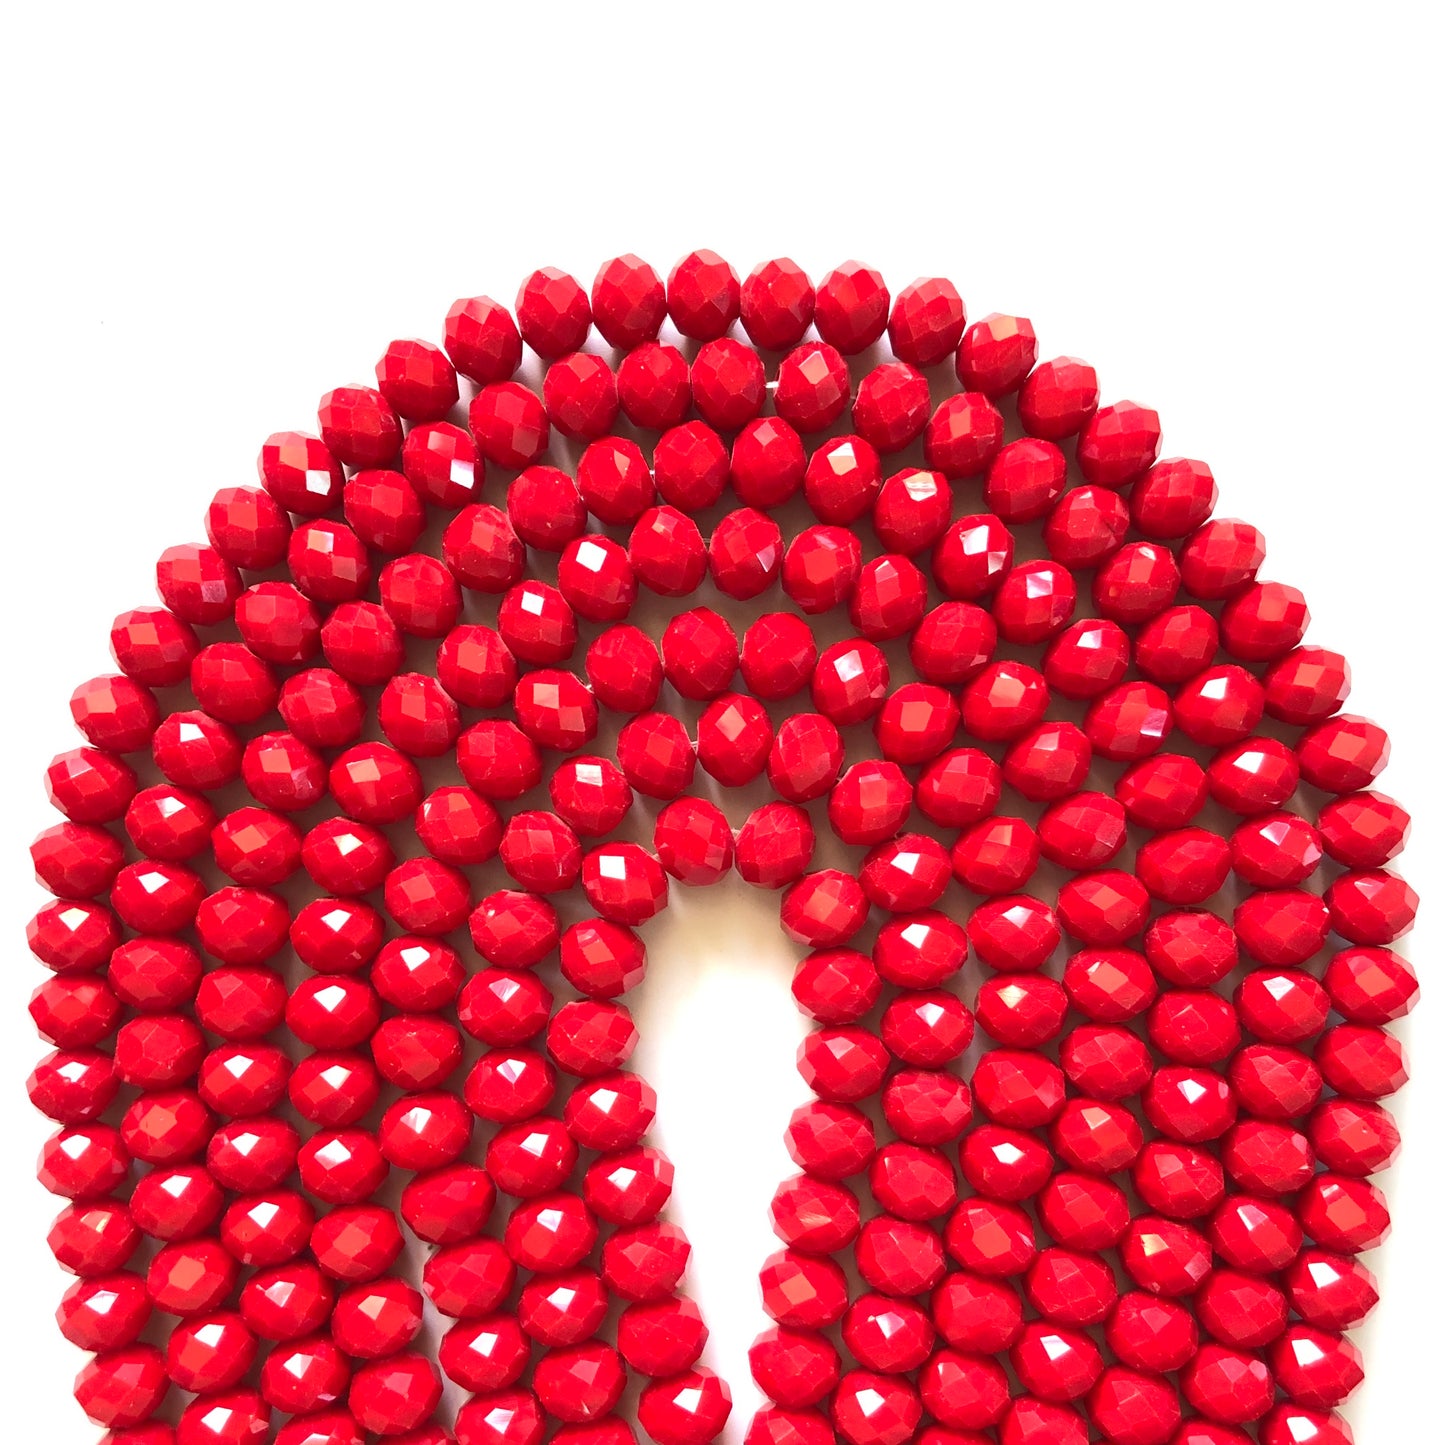 2 Strands/lot 10mm Red Faceted Glass Beads Glass Beads Faceted Glass Beads Charms Beads Beyond